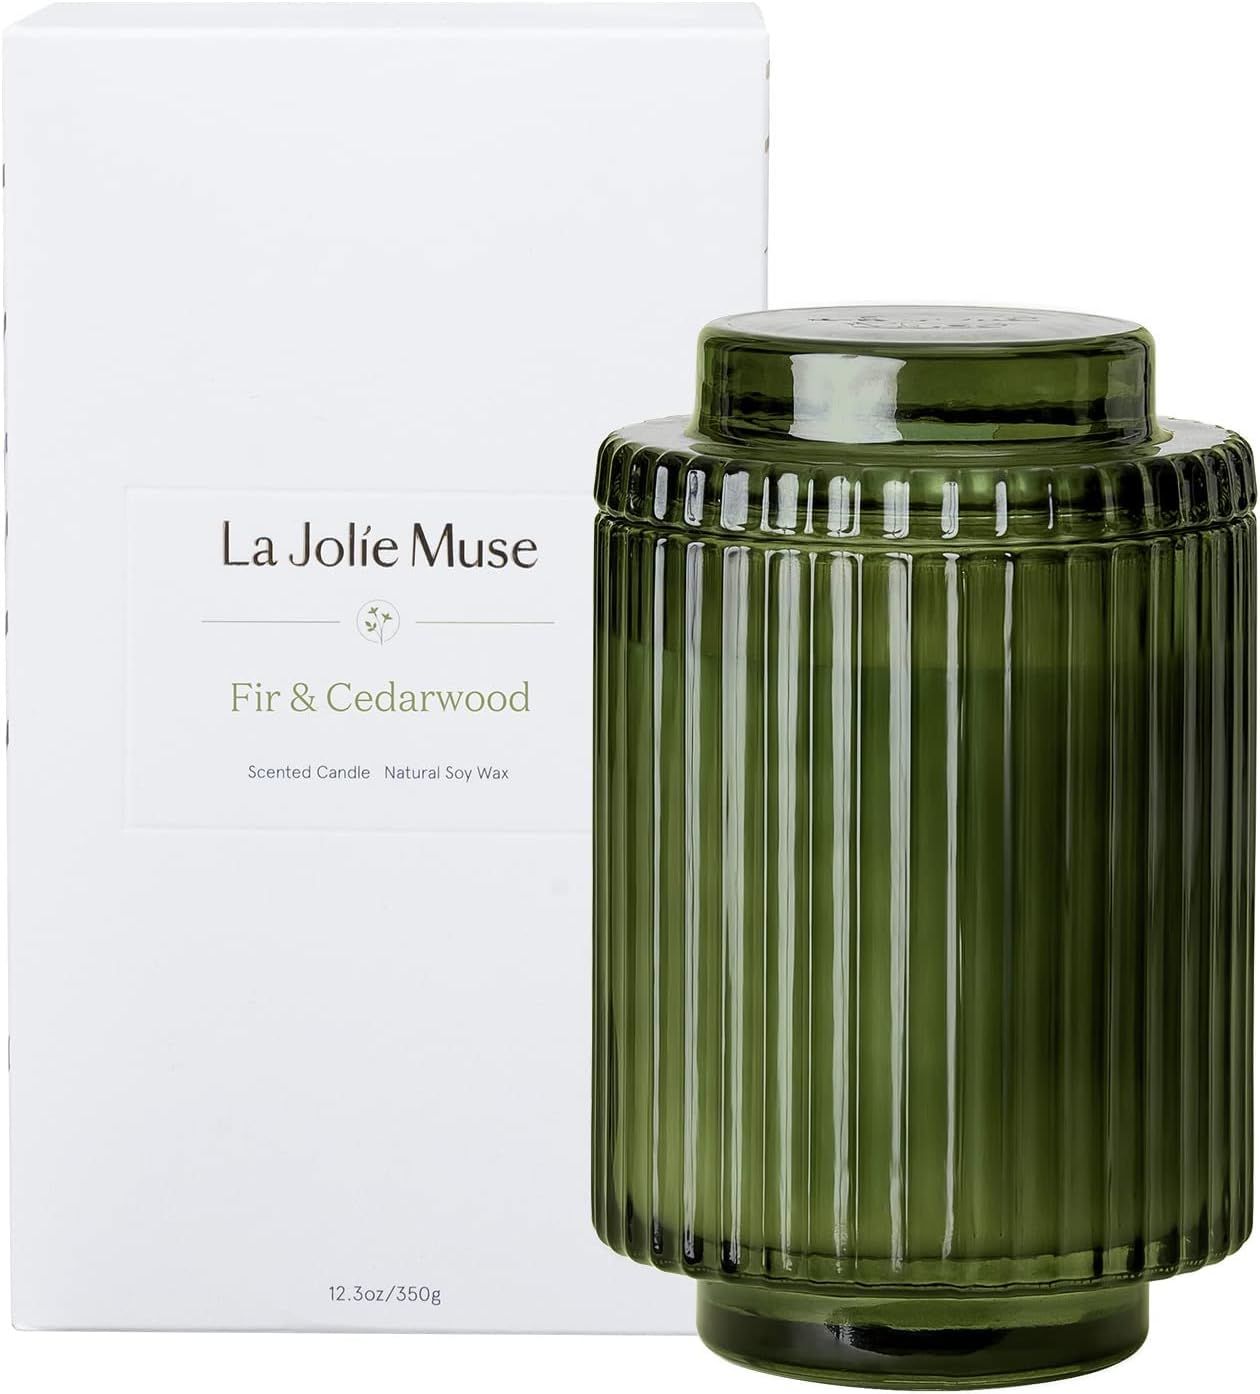 LA JOLIE MUSE Fir & Cedarwood Scented Candle - Christmas Candles Gift for Holiday, Green Candles ... | Amazon (US)